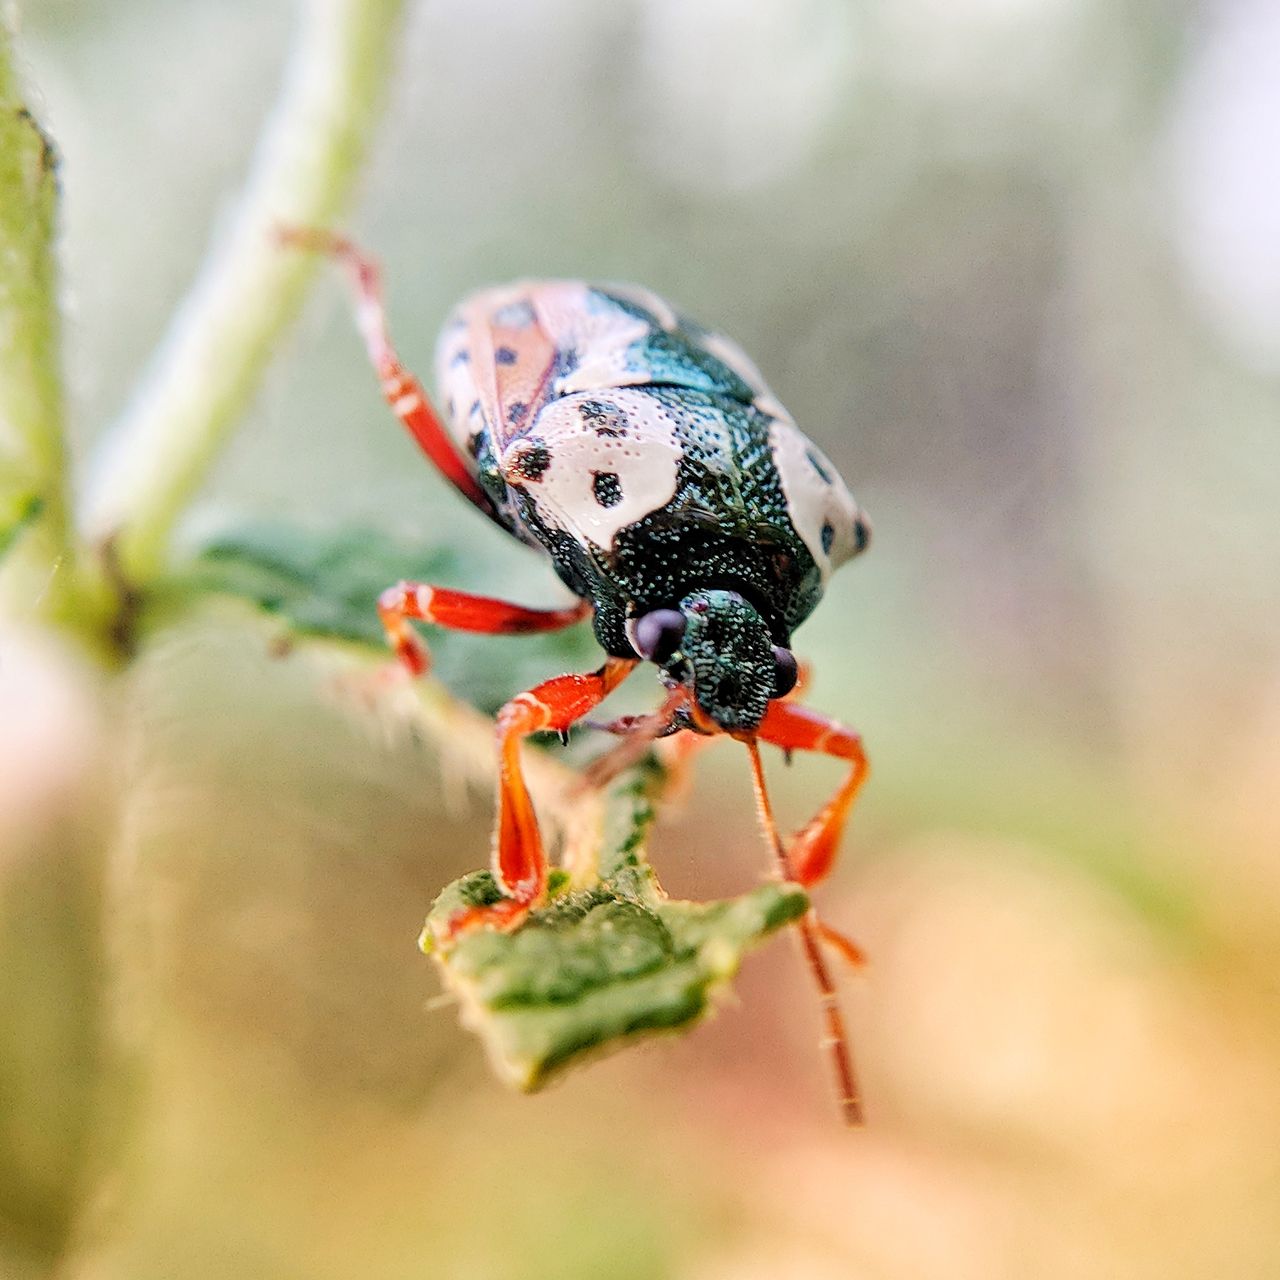 Beetle on a plant